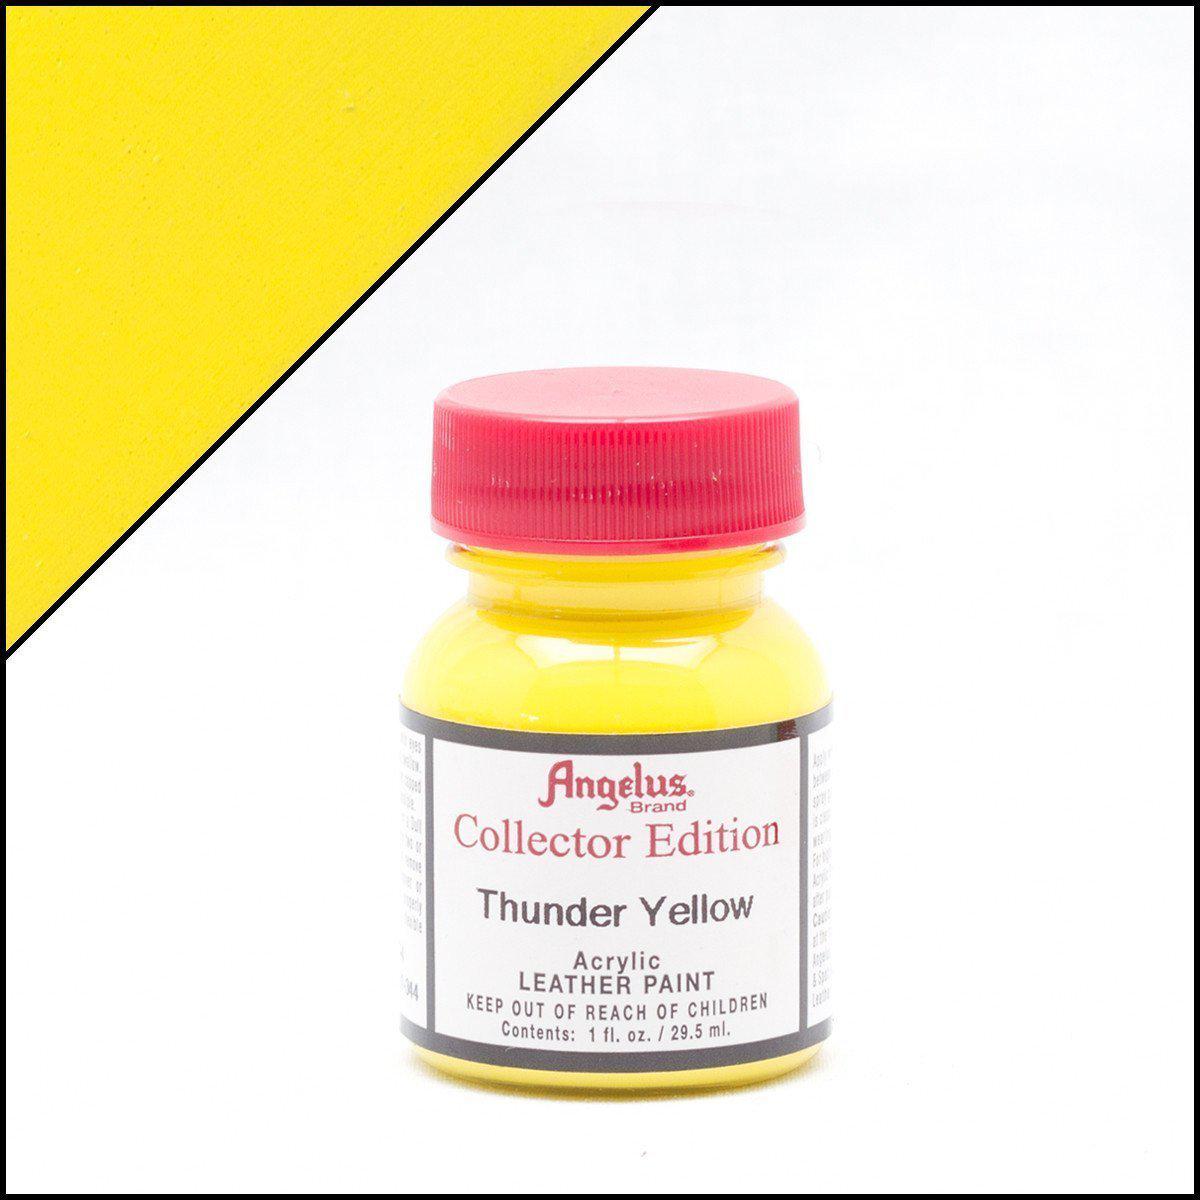 Thunder Yellow-Angelus-Collectors Leather Paint-TorontoCollective